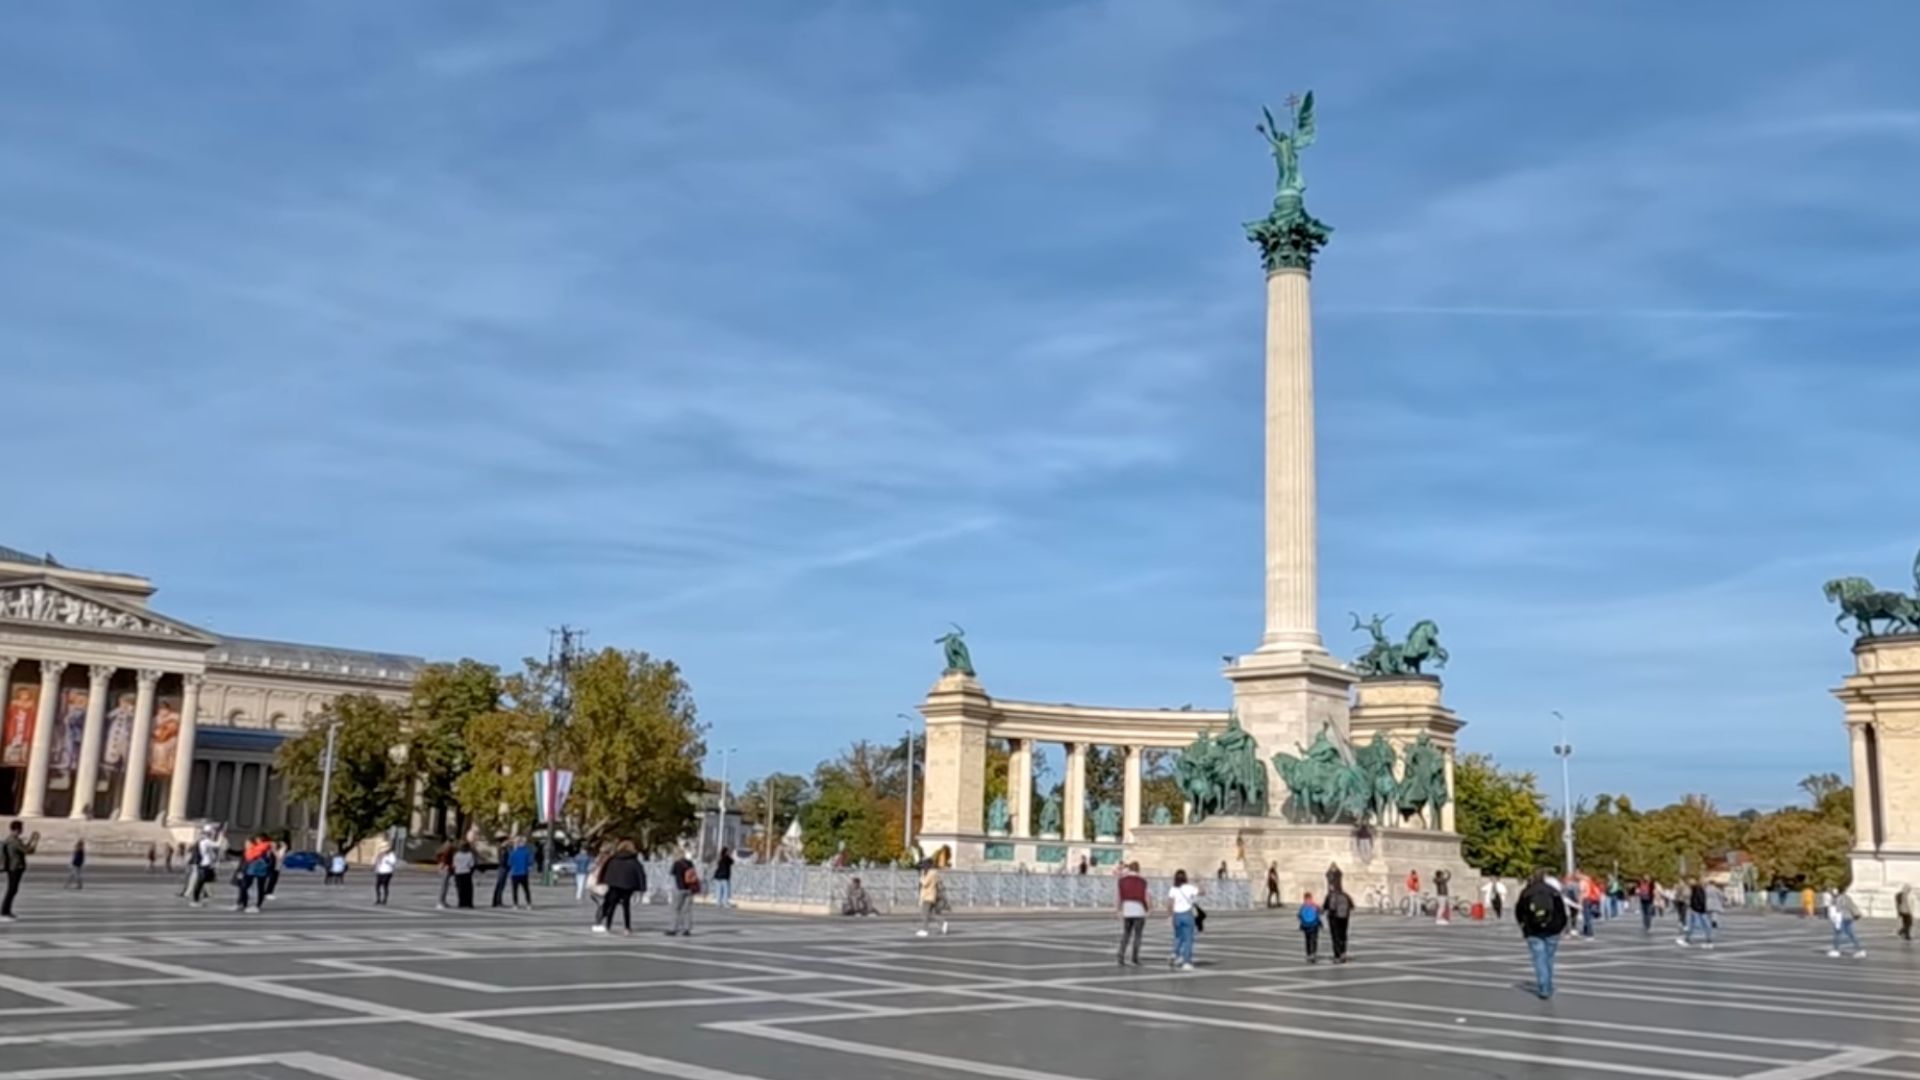 View of the central monument at Heroes' Square in Budapest, with people walking around the square.